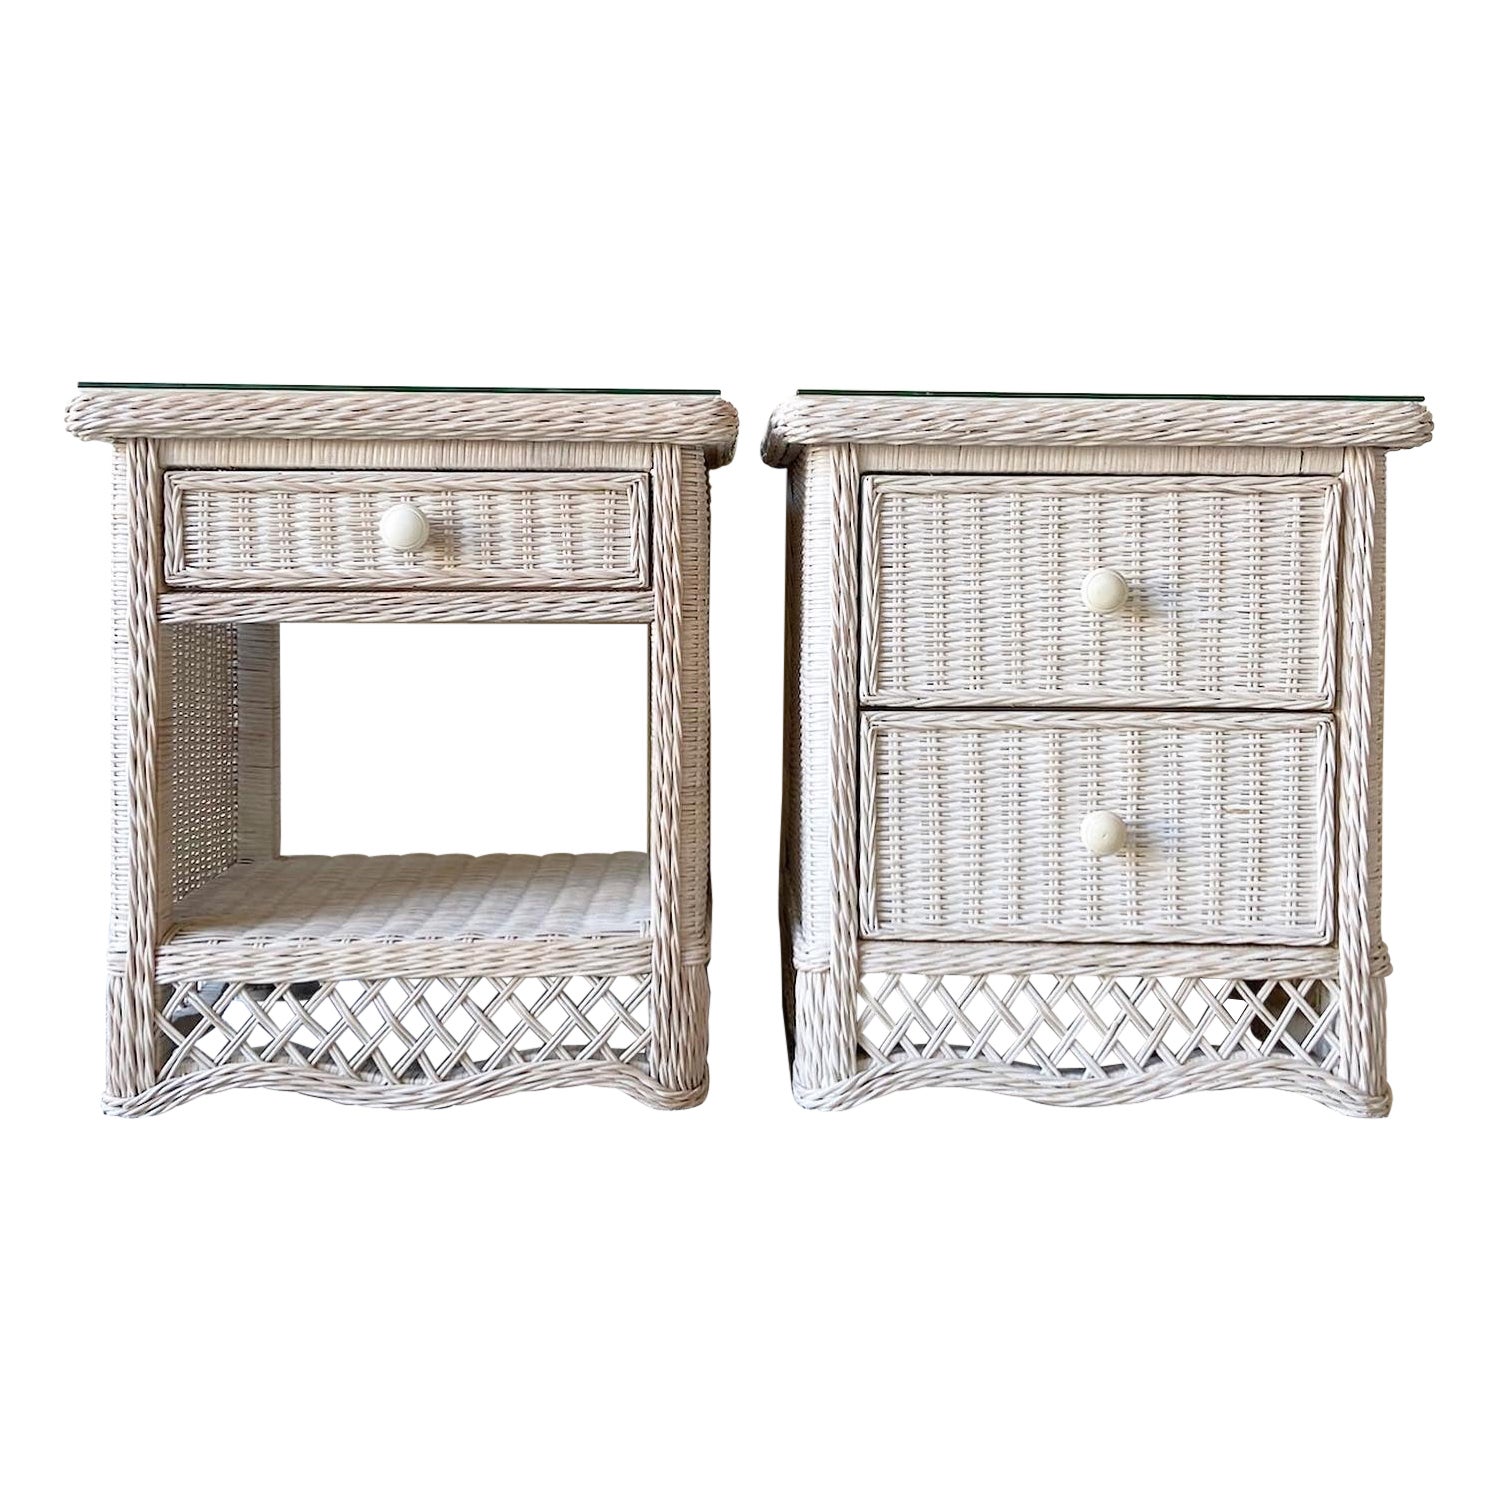 Boho Chic White Wicker Glass Top Nightstands, a Pair